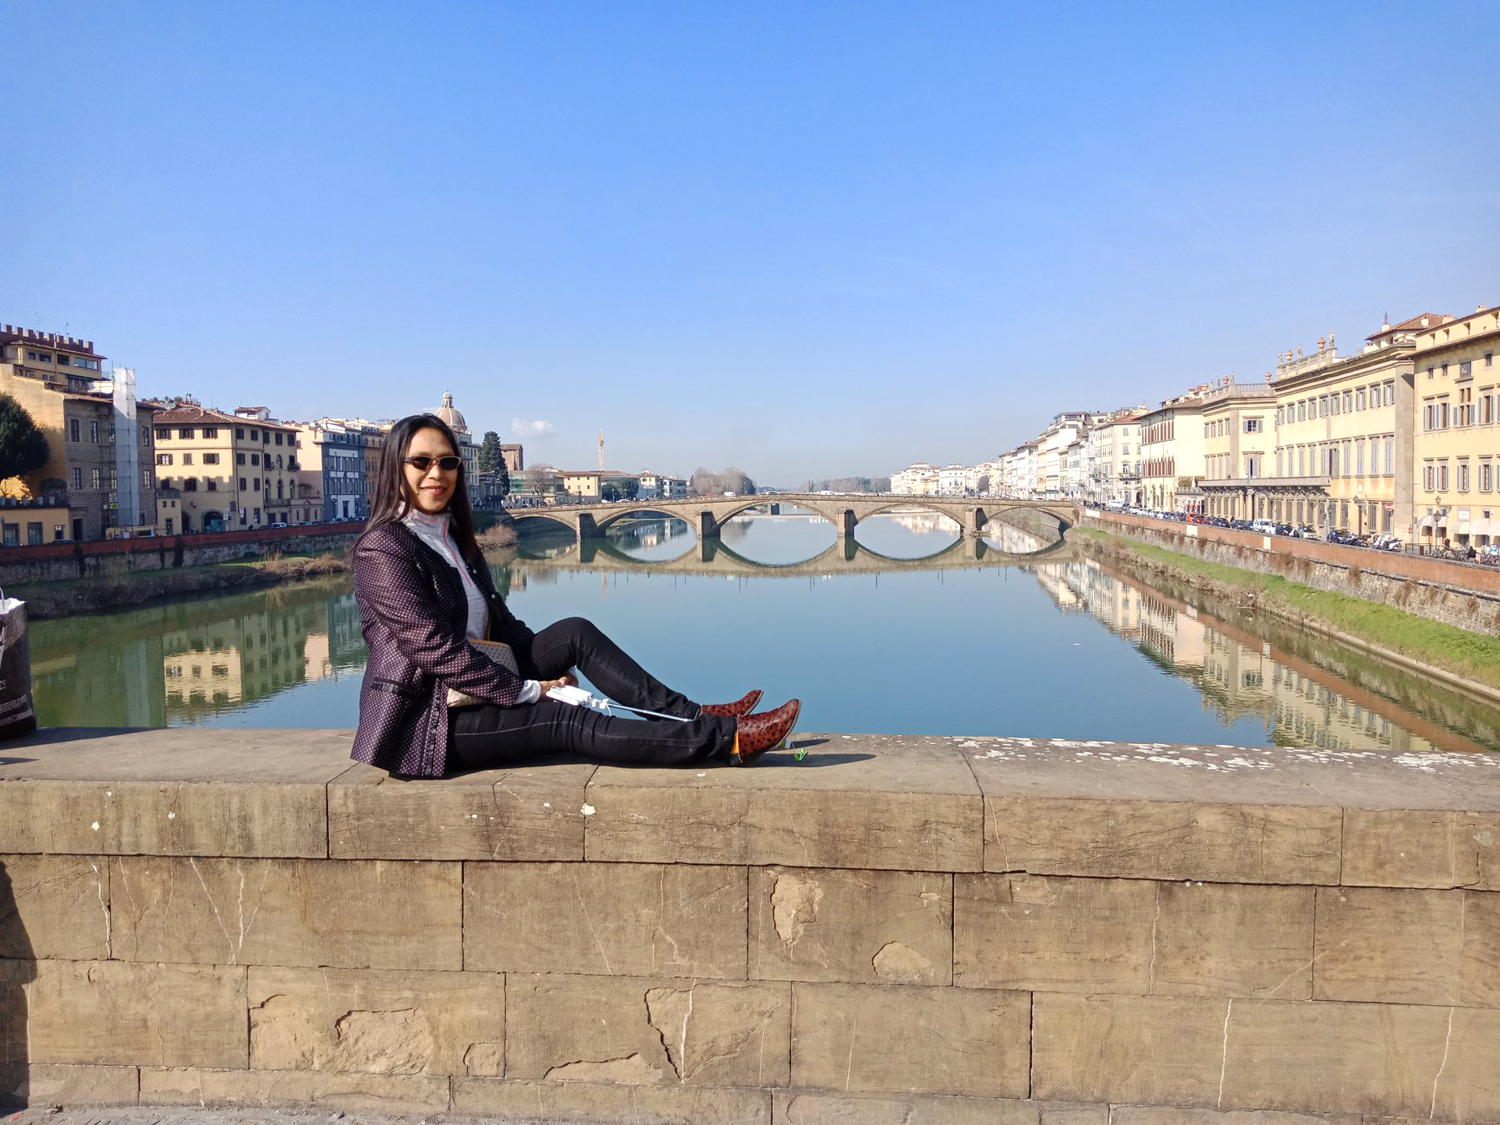 Day 04 -  Hotel Stay in Florence  (1 night)